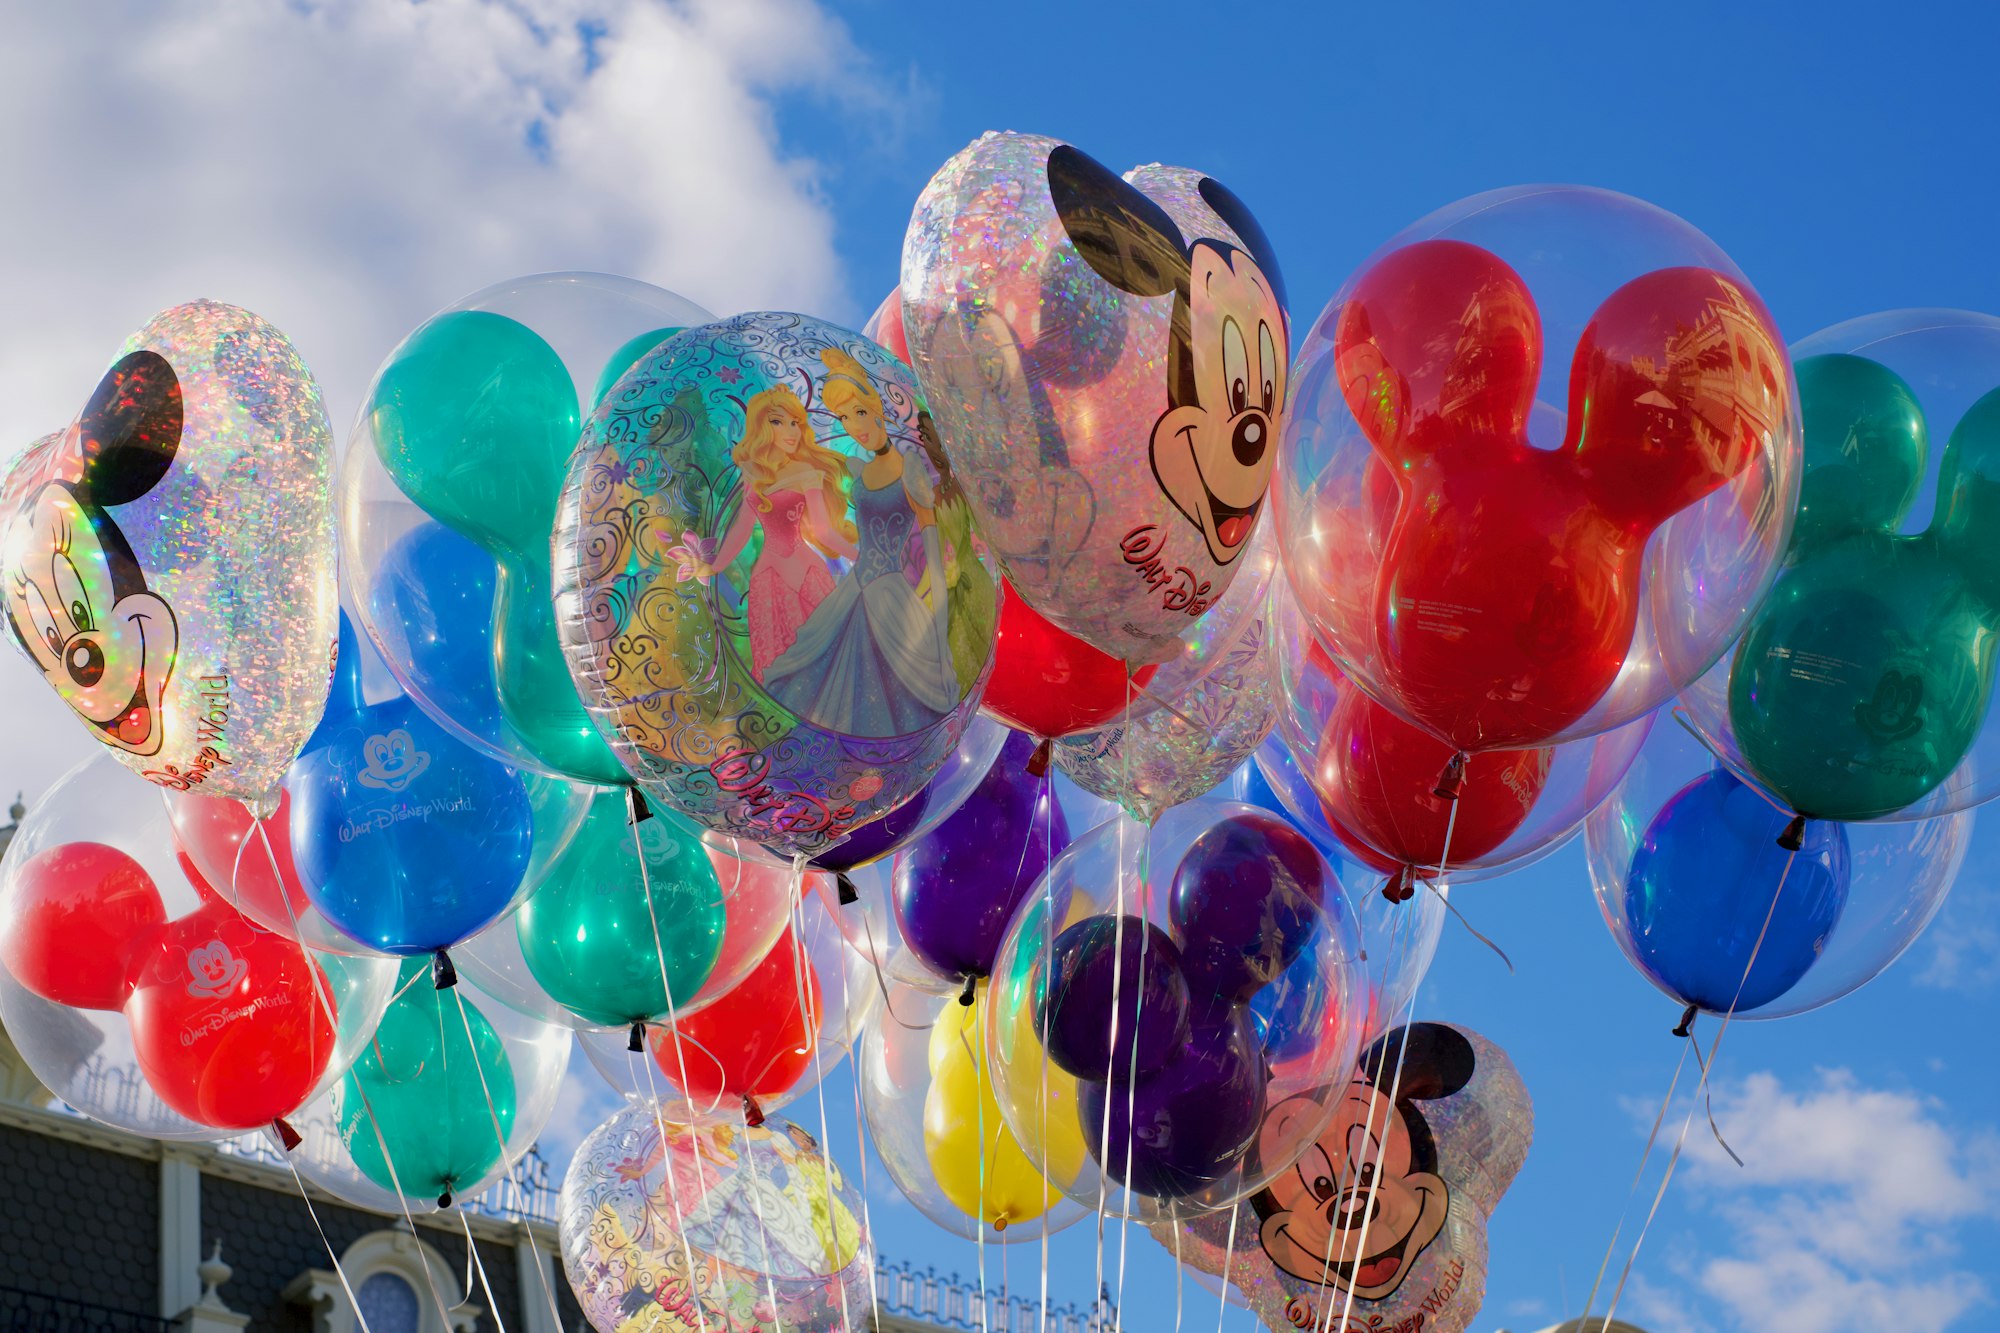 Colorful balloons from a recent trip to Walt Disney World.